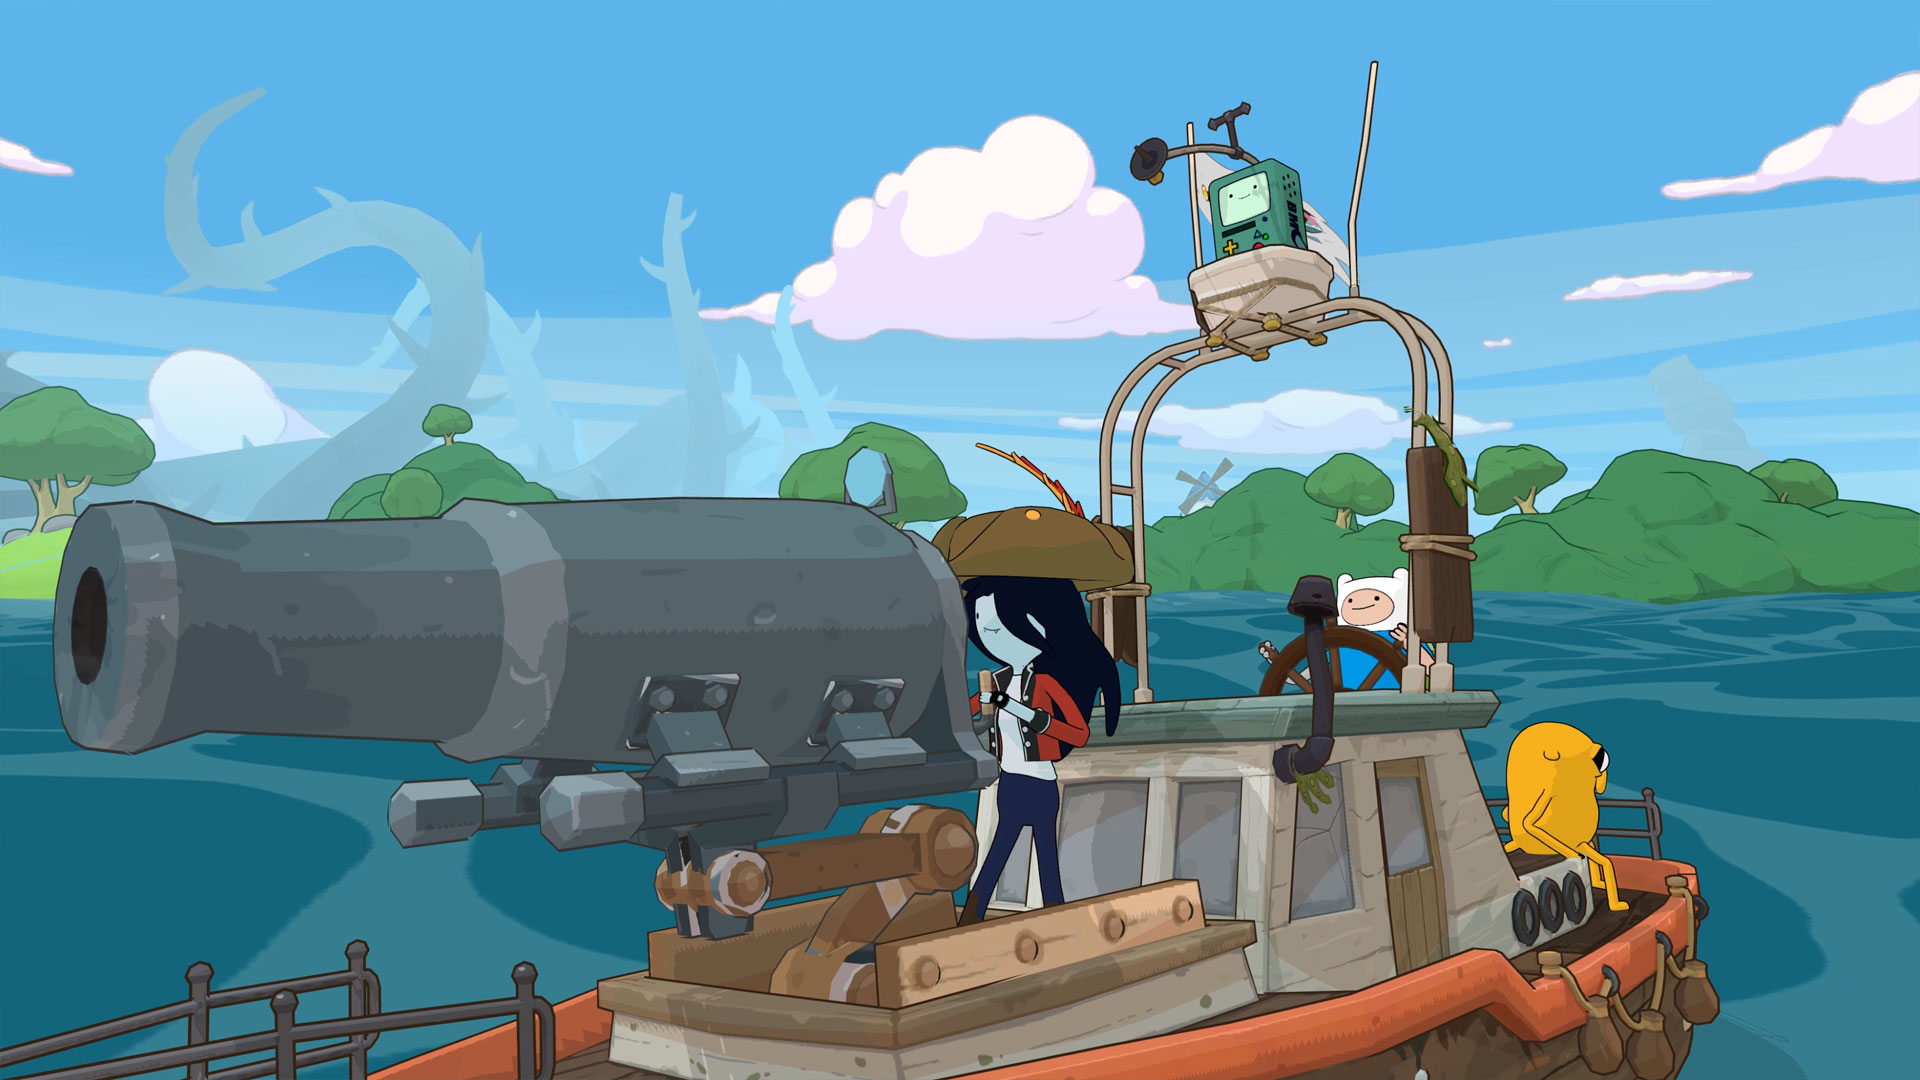 Adventure Time: Pirates of the Enchiridion Playstation 4 Screenshot